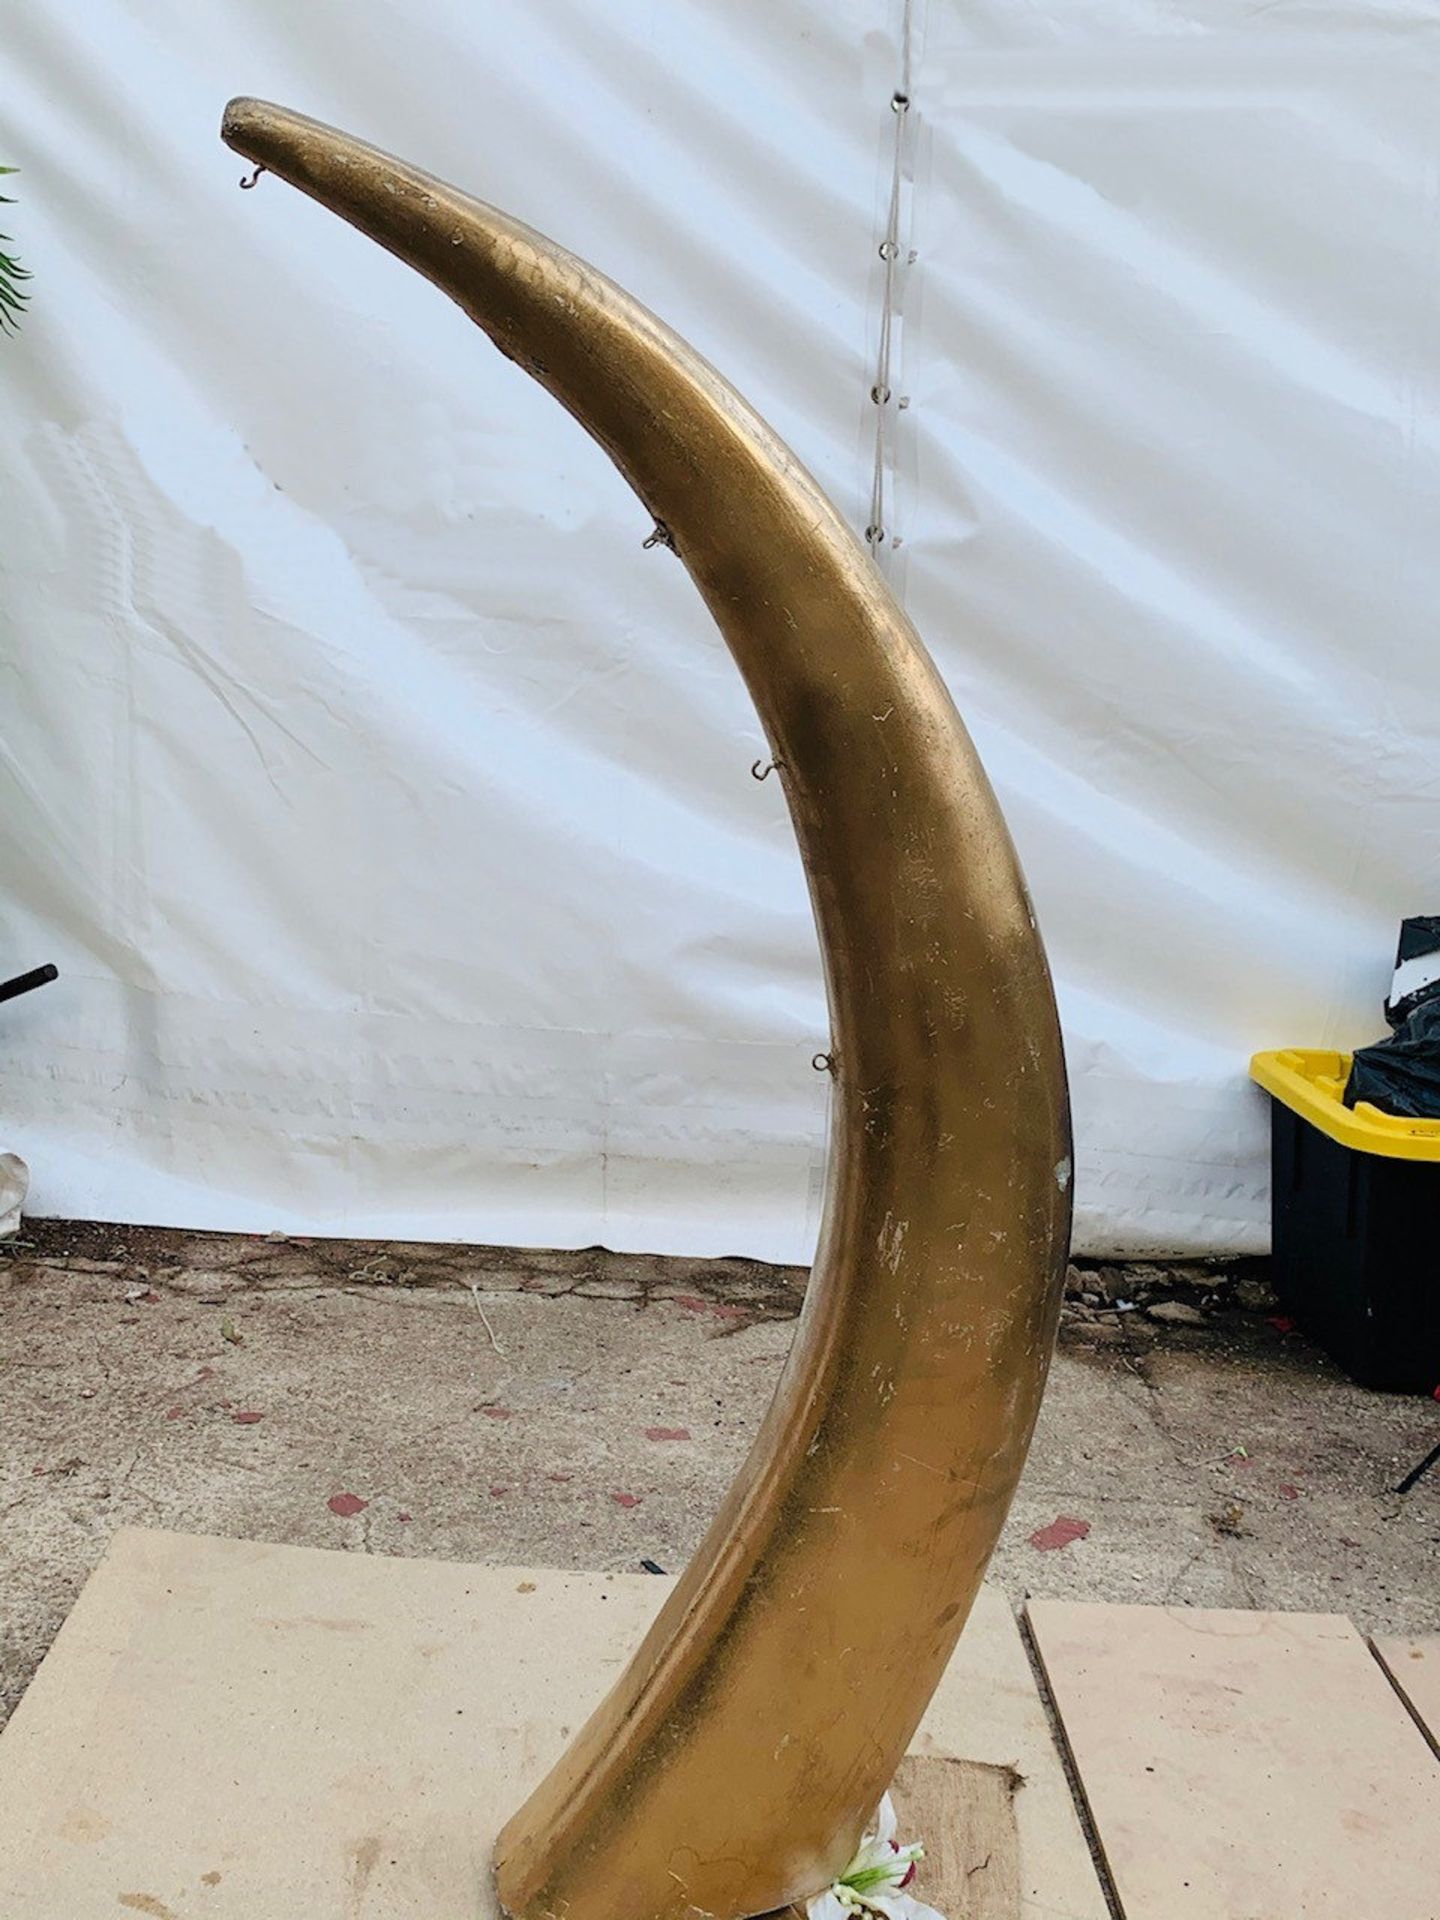 5 x Tusk Shaped 1.2 Metre Tall Fibre Glass Table Centre Pieces In Gold - Image 2 of 2